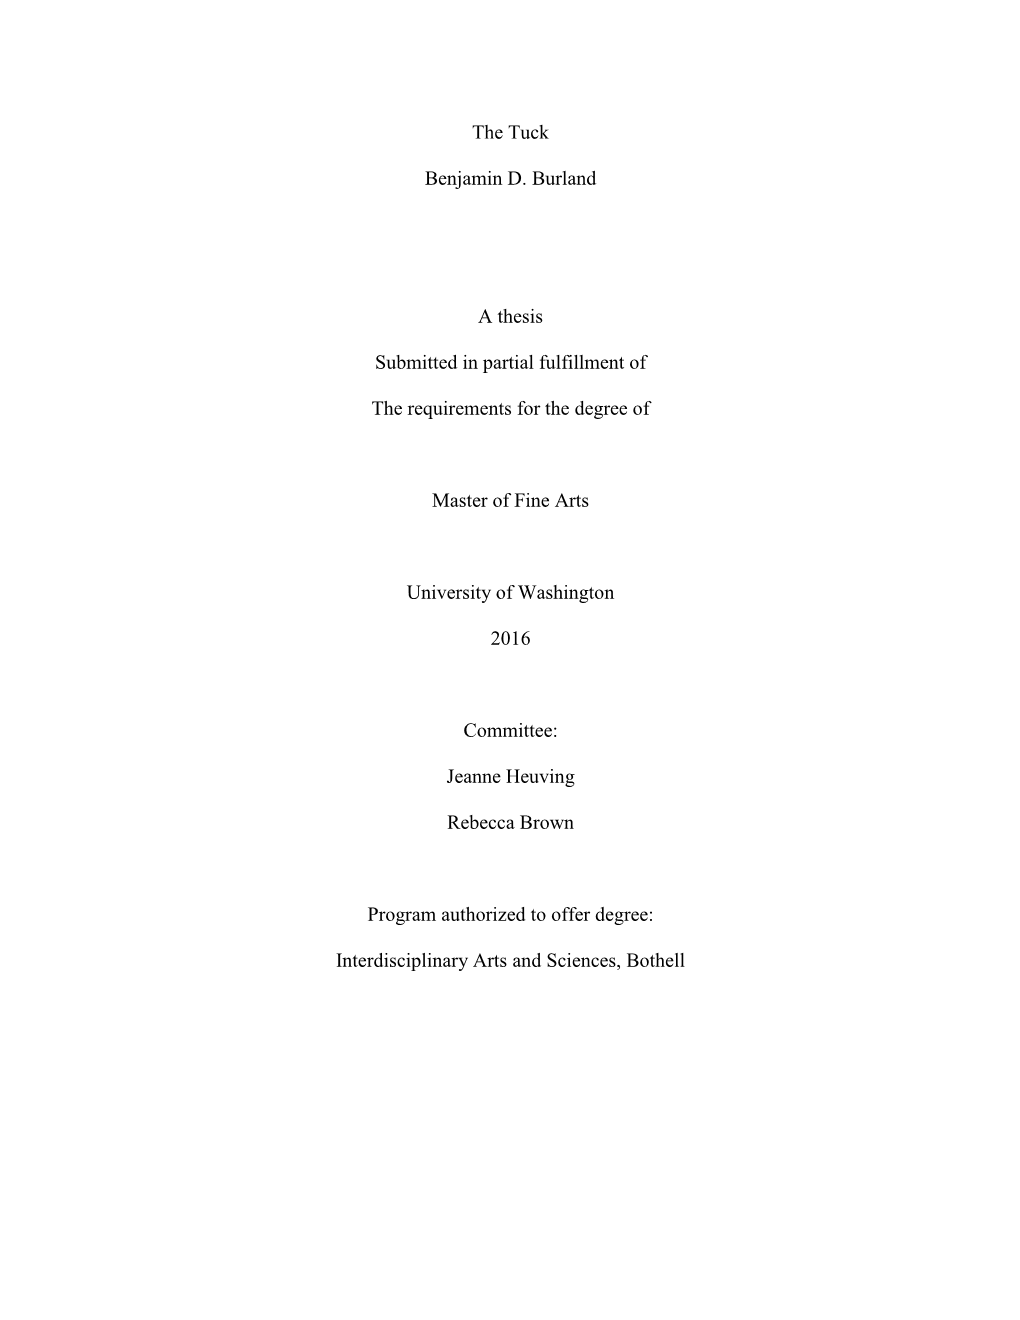 The Tuck Benjamin D. Burland a Thesis Submitted in Partial Fulfillment